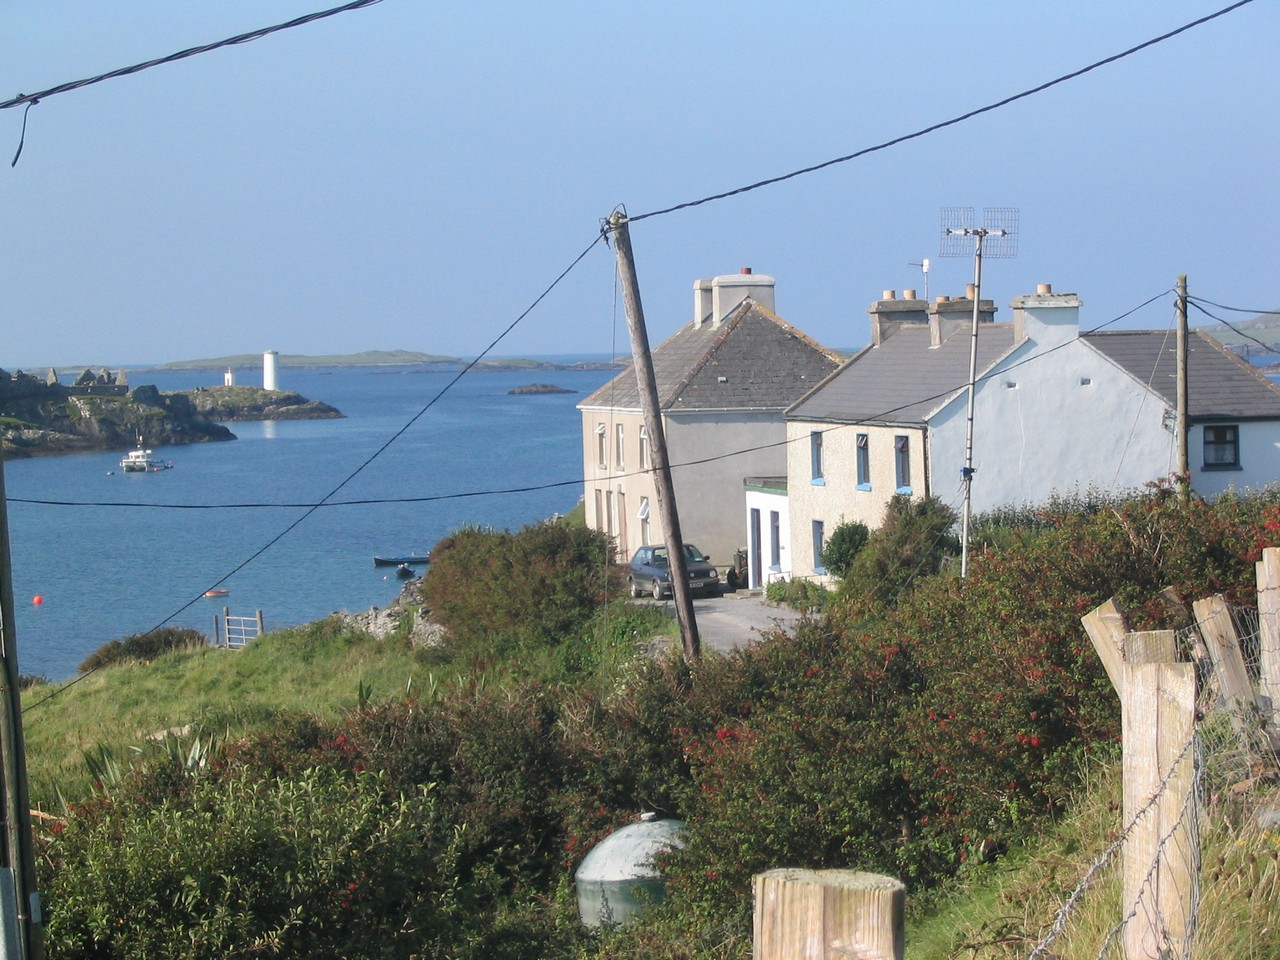 Looking across Inishbofin Harbour towards the white navigation marker which marks the harbour entrance and to its left Cromwell's Fort.